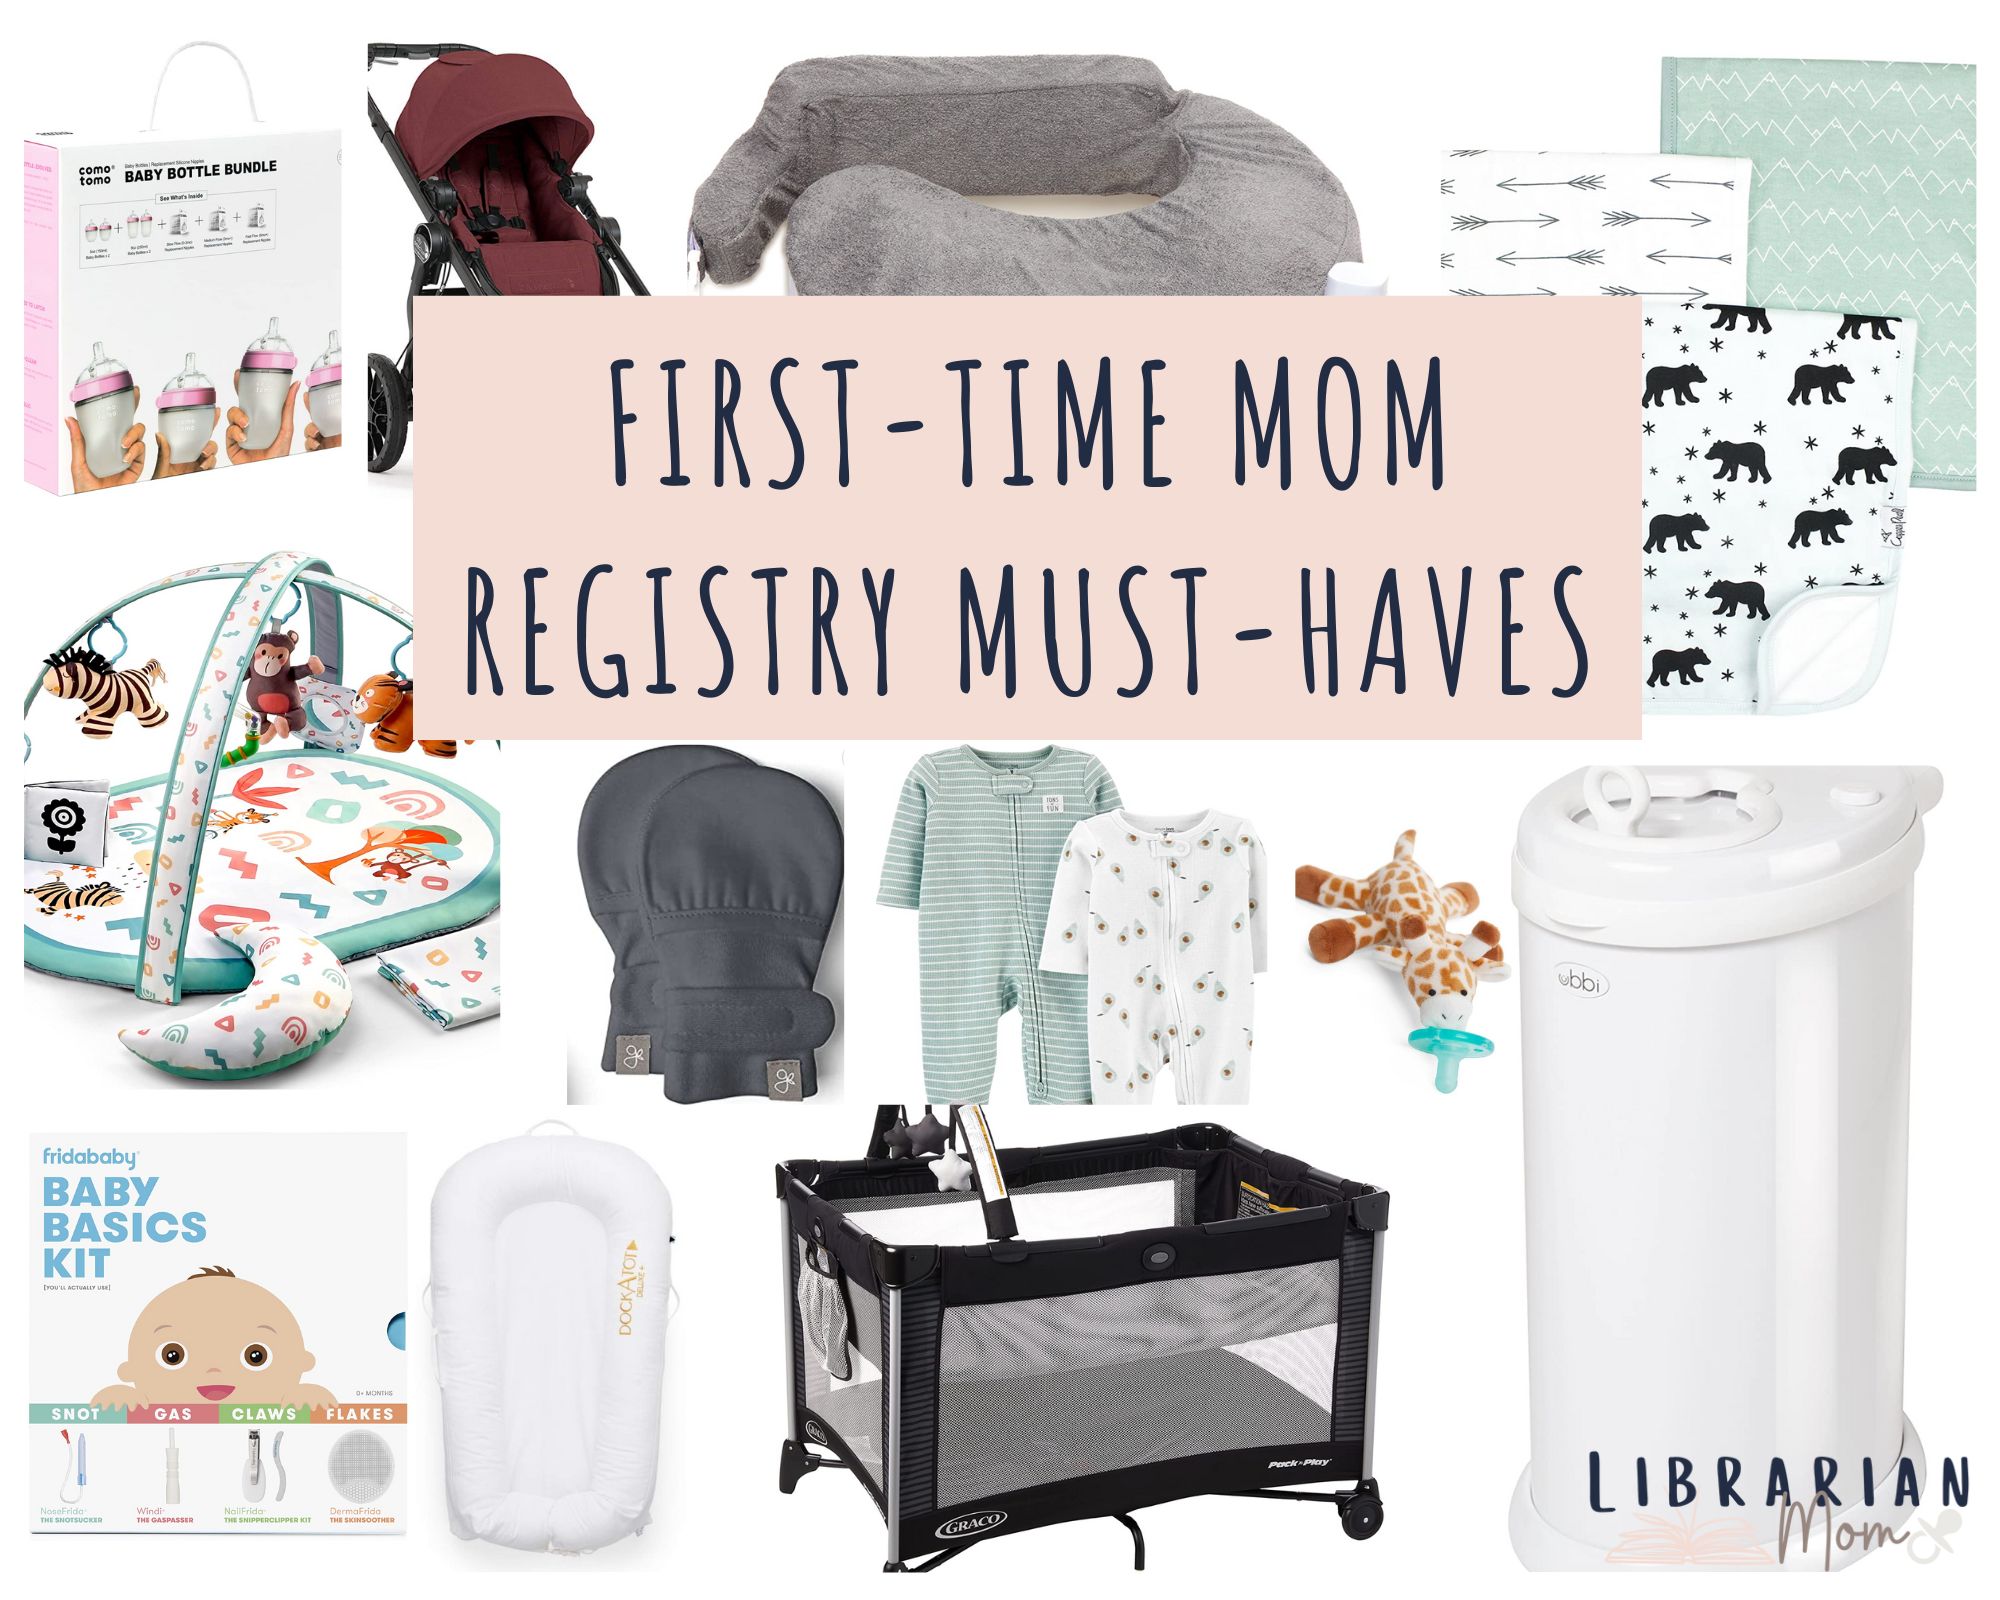 https://librarianmom.com/wp-content/uploads/2022/10/first-time-mom-registry-must-haves.jpg